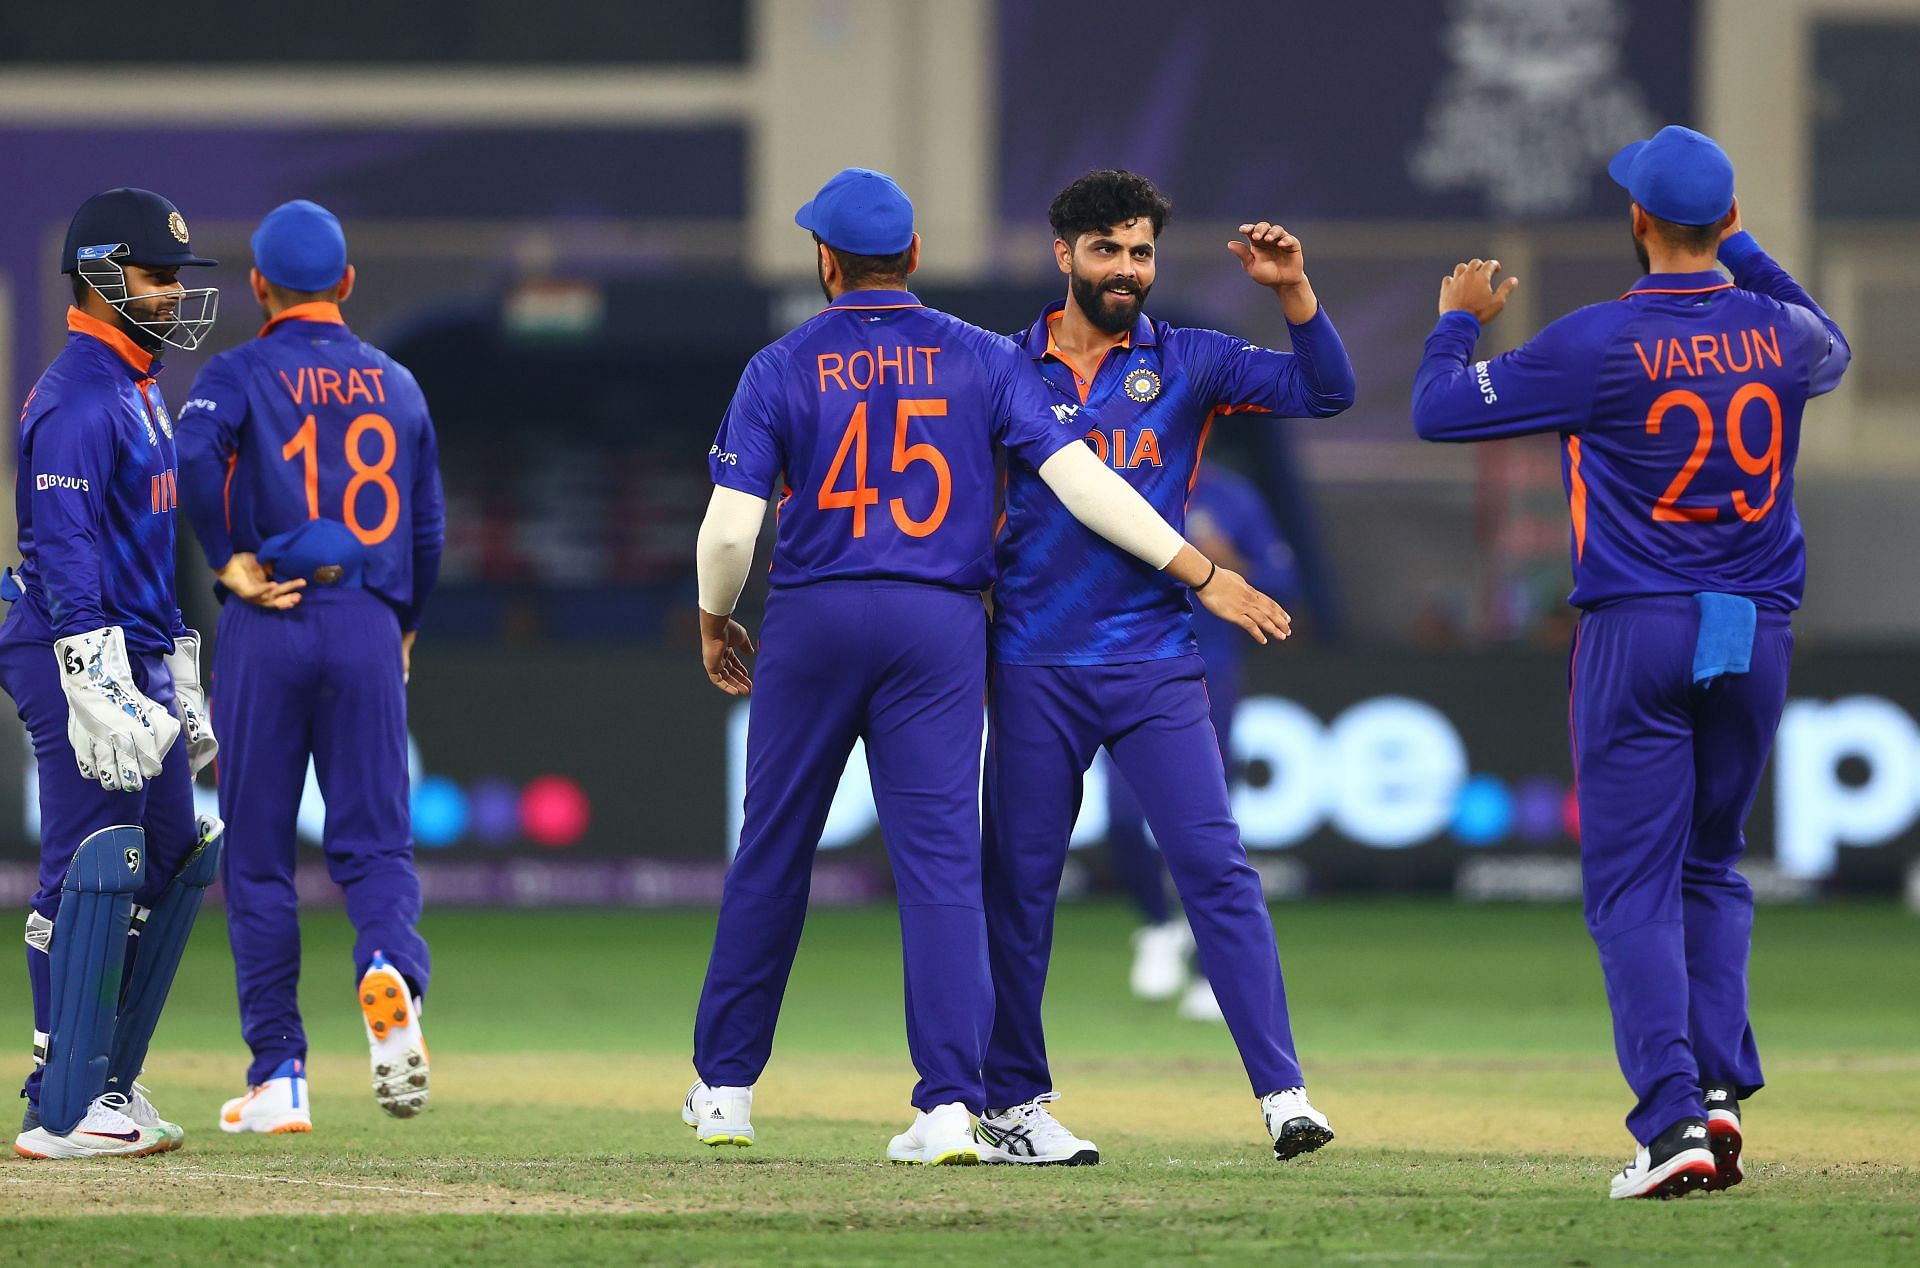 India are on a 2-match winning streak in ICC T20 World Cup 2021